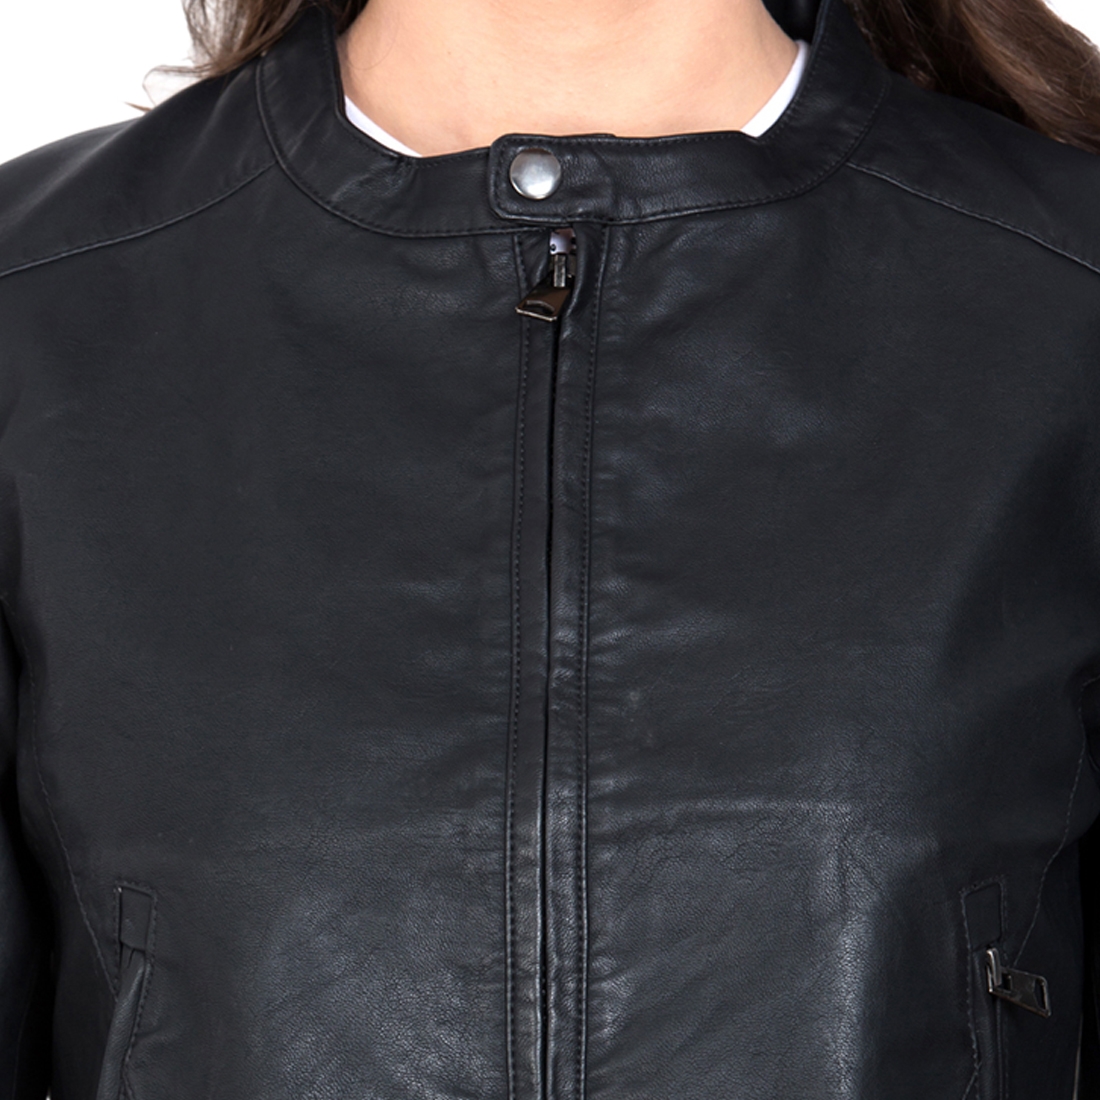 Justanned | JUSTANNED CHARCOAL WOMEN LEATHER JACKET 5